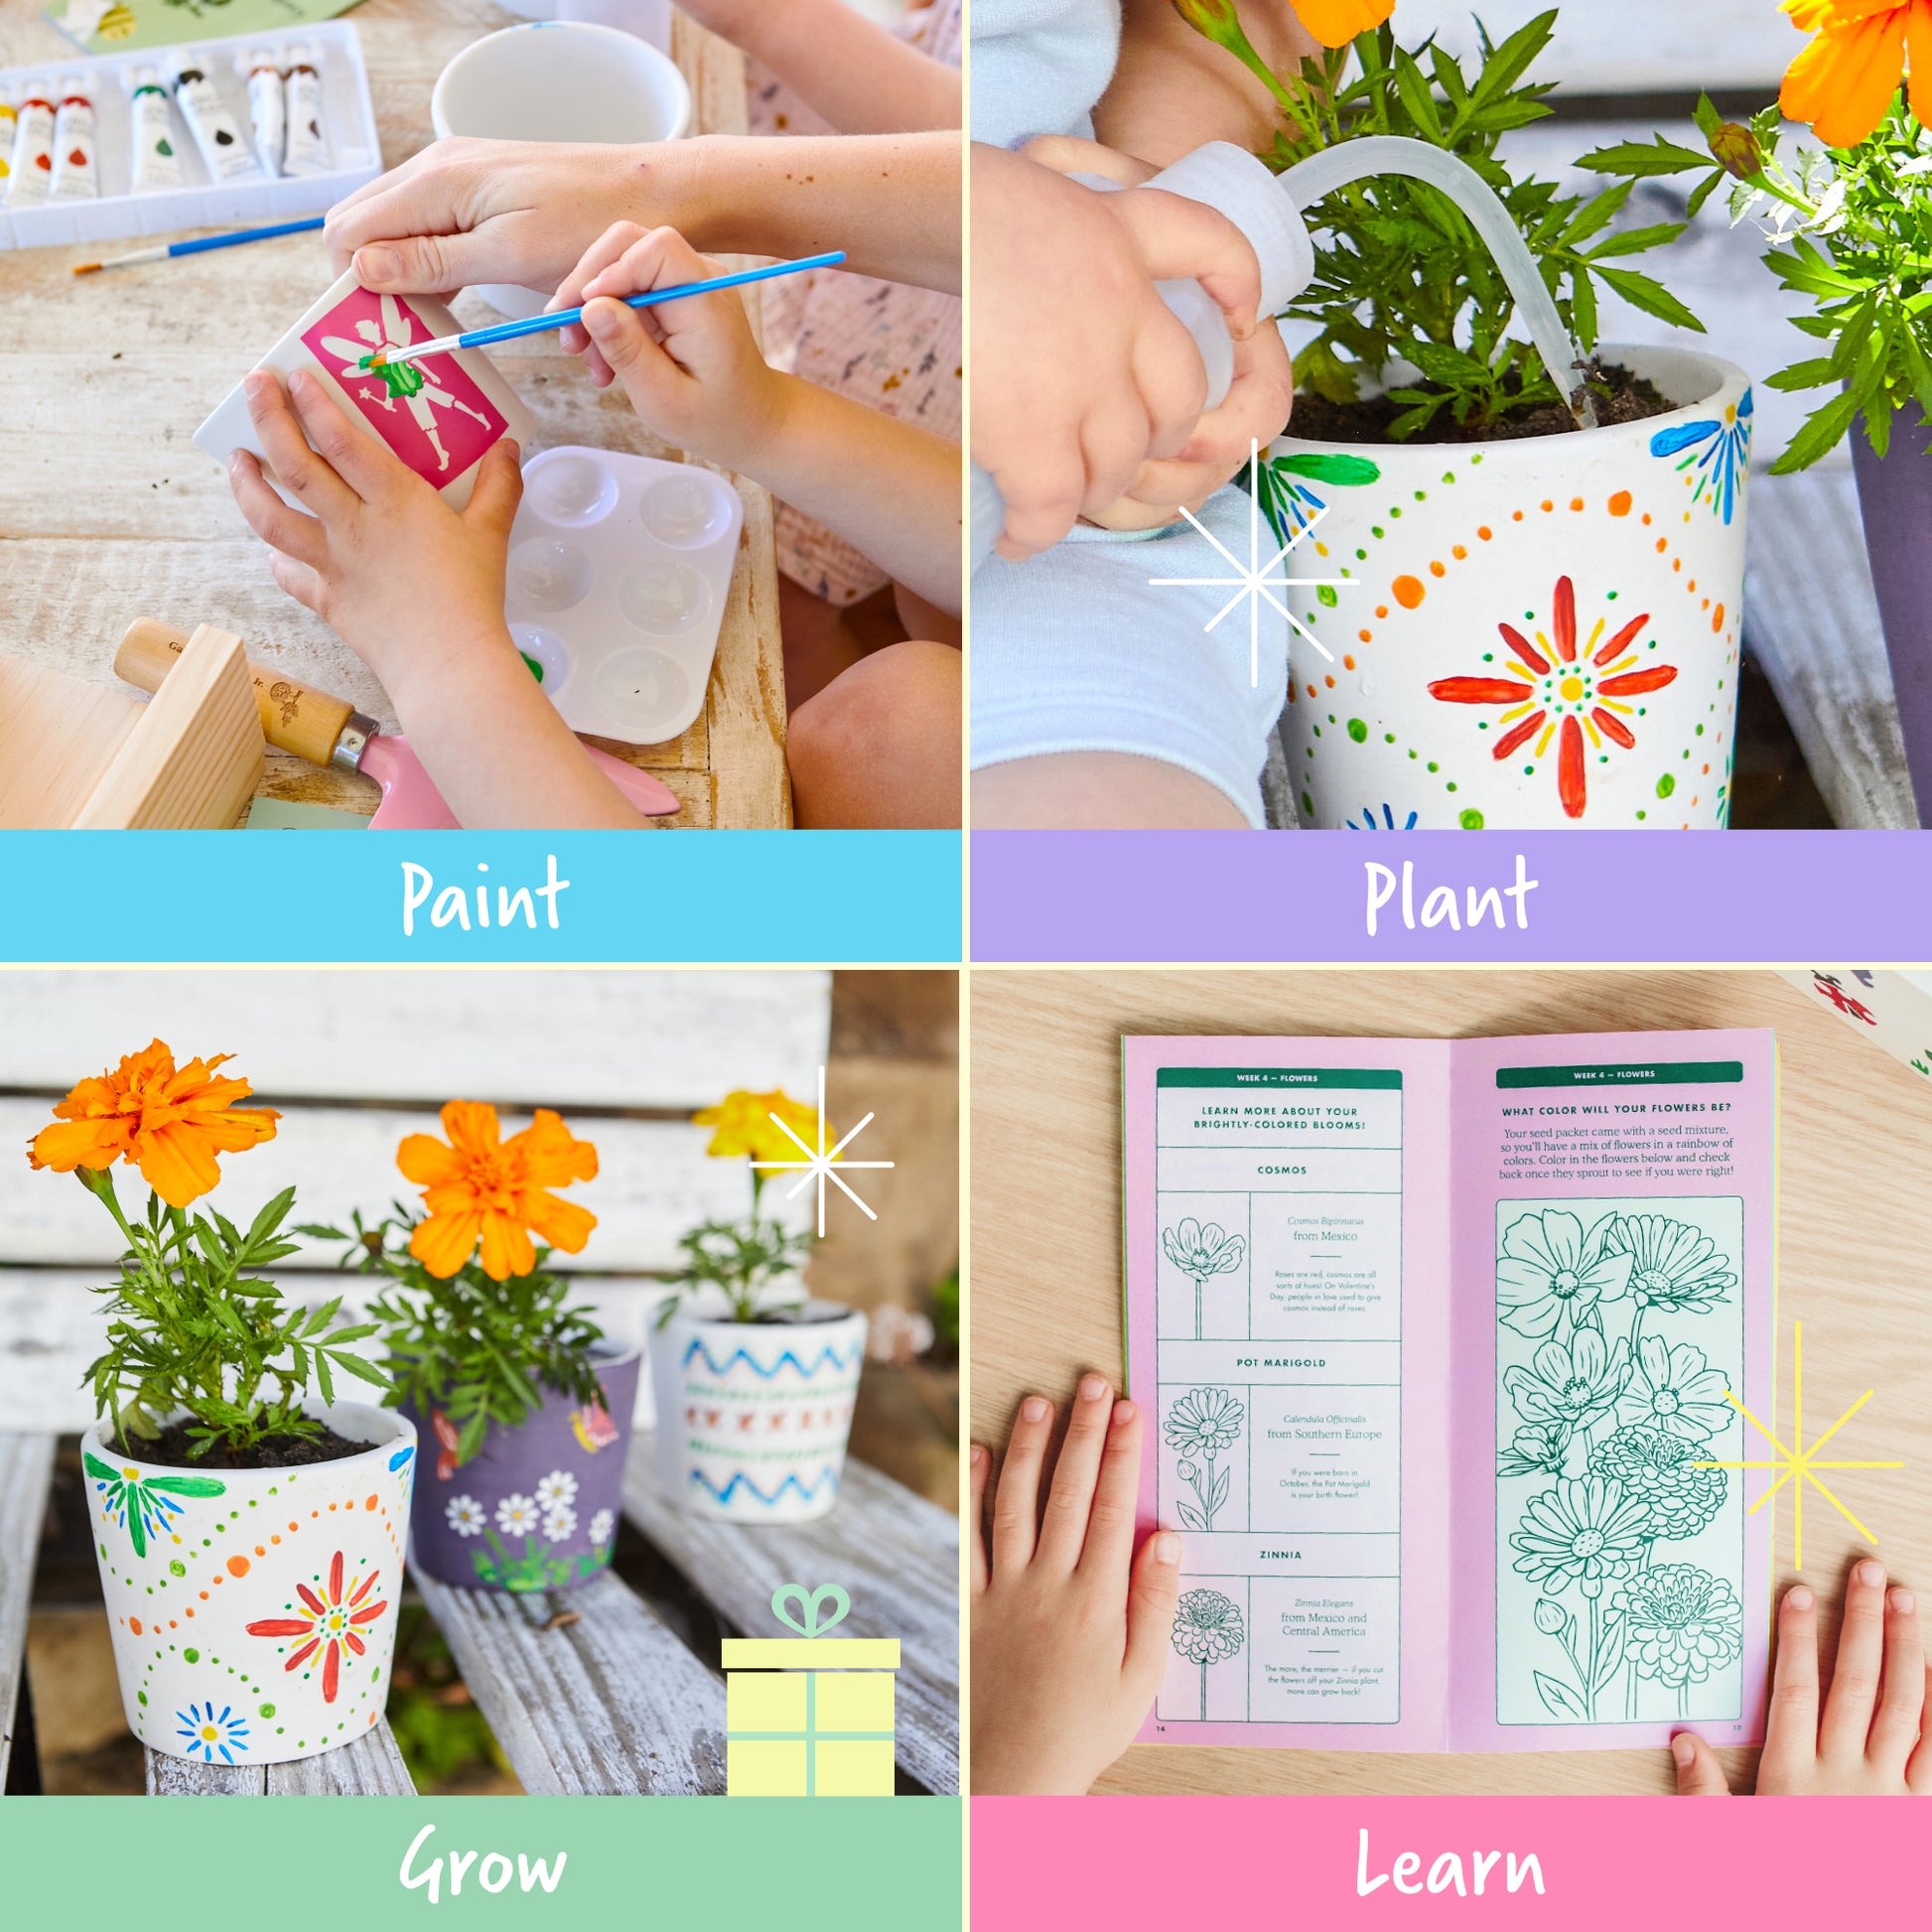 4 Set Paint & Plant Ceramic Flower Gardening Kit - Crafts for Girls Ages  8-12, Arts and Crafts for Kids Ages 8-12, Art Supplies for Kids, Toys  Birthday Gifts for Girls Boys